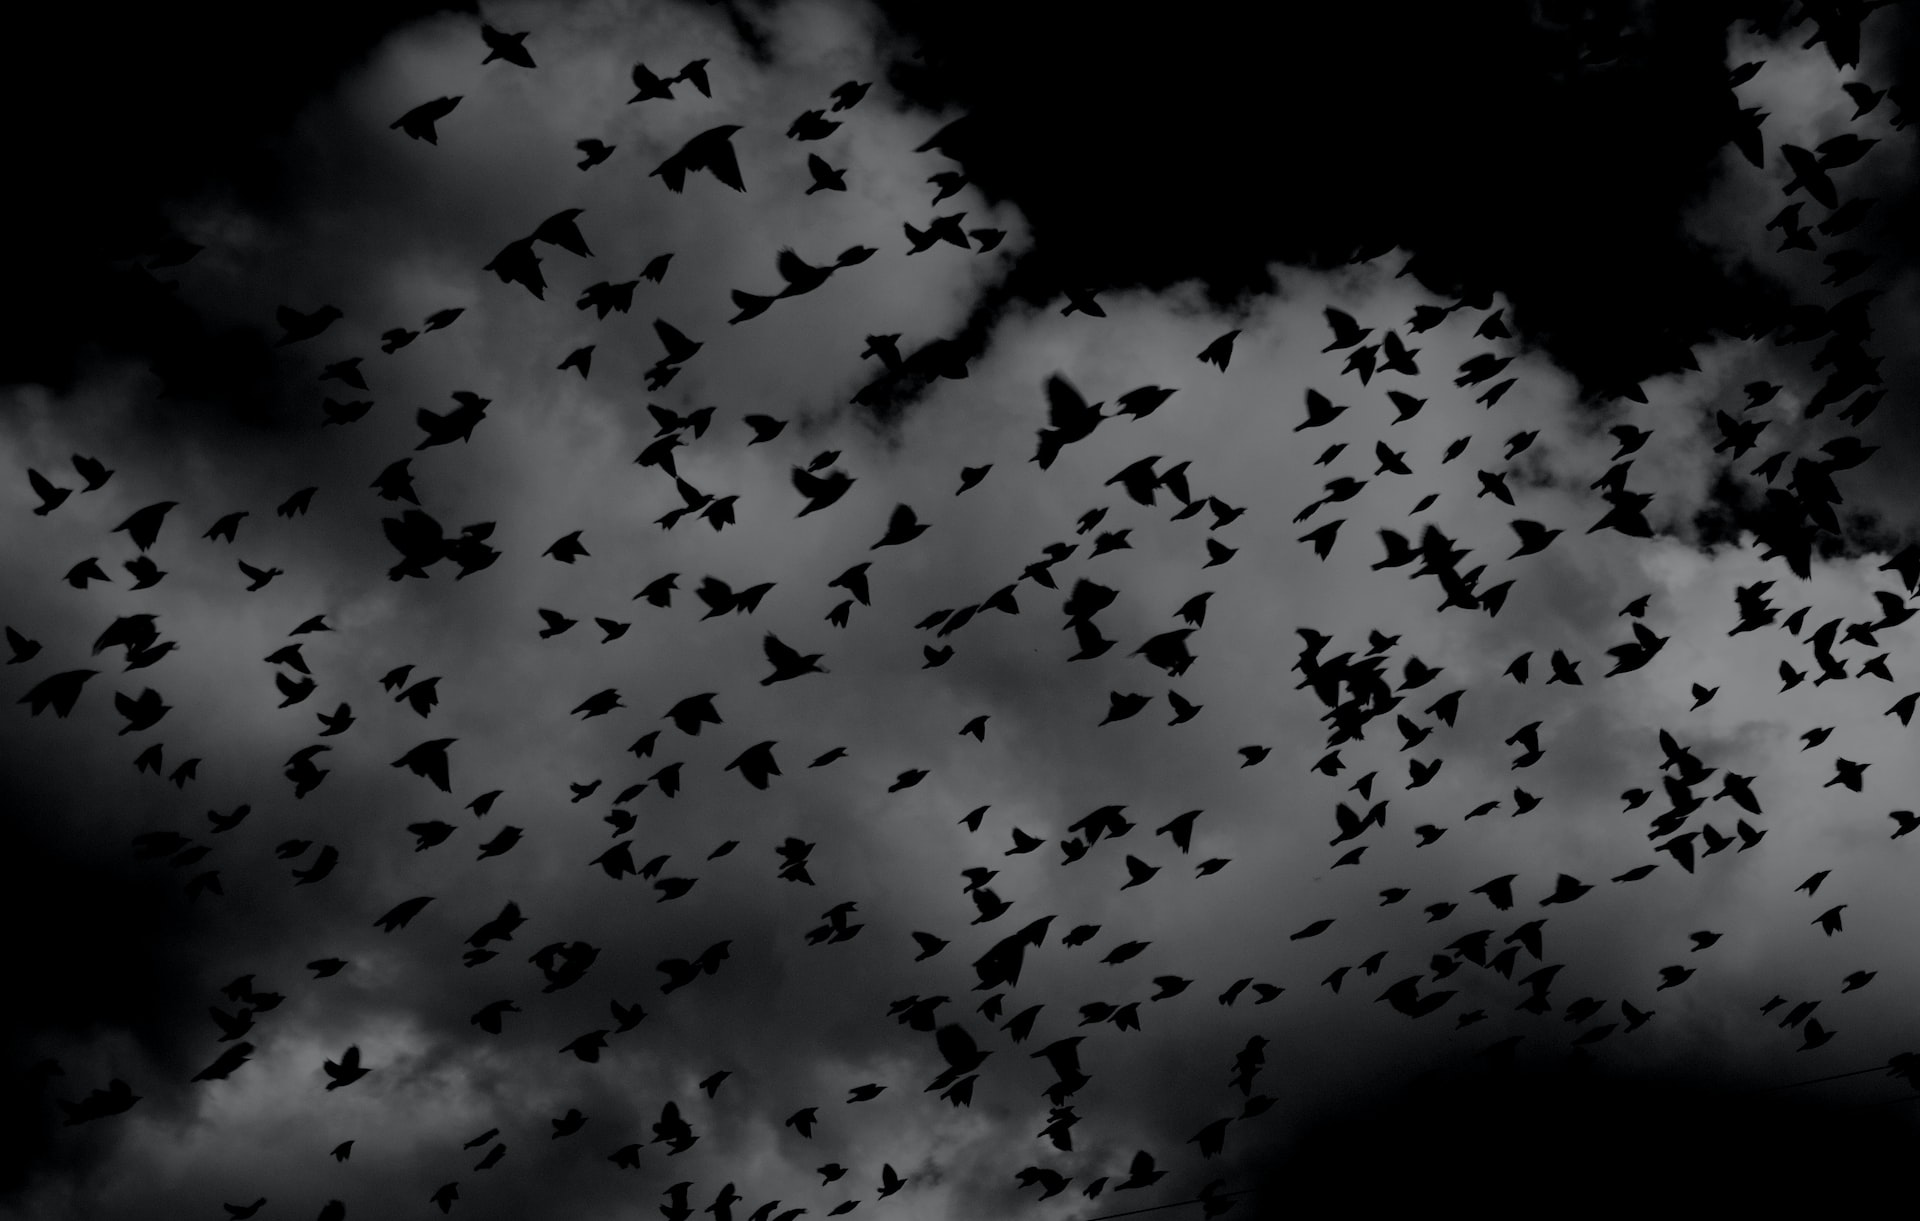 Spiritual Meaning Of Crows - Are They A Sign Of Evil And Death?